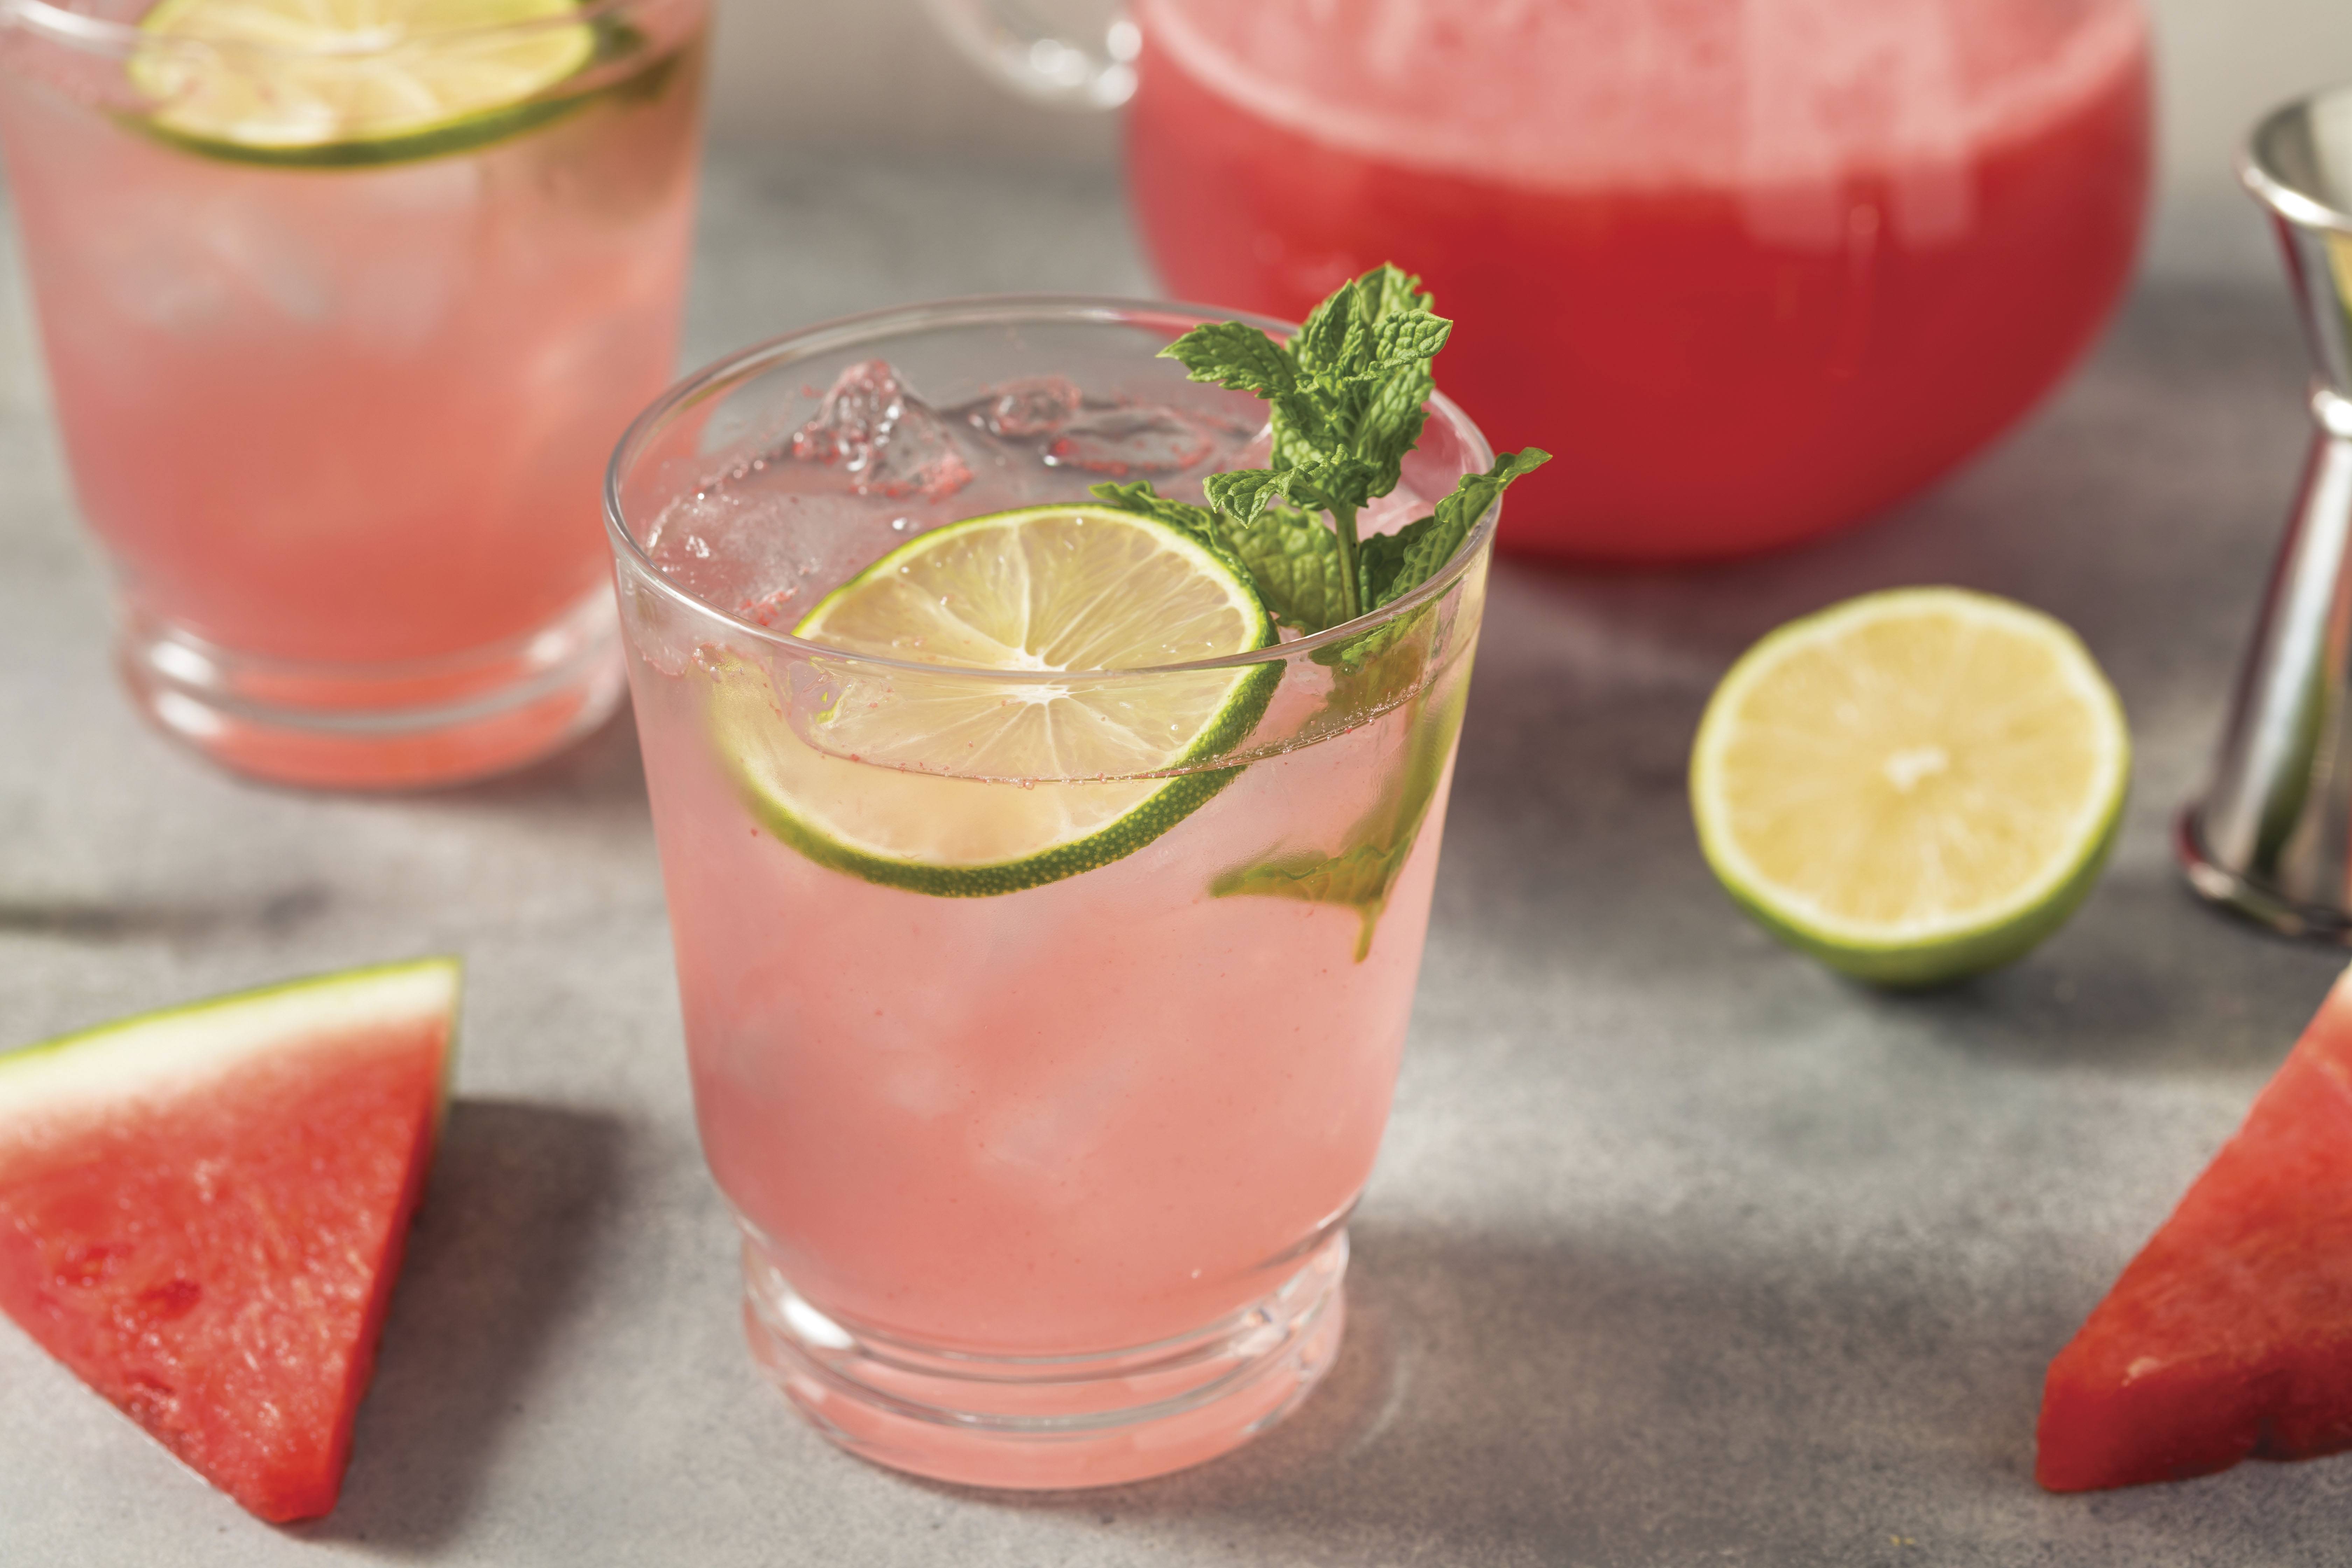 Drink Up: “I do a lot of aguas frescas. I like to cube watermelon and blend it with a bit of lime juice and mint. It also makes a nice cocktail base.”